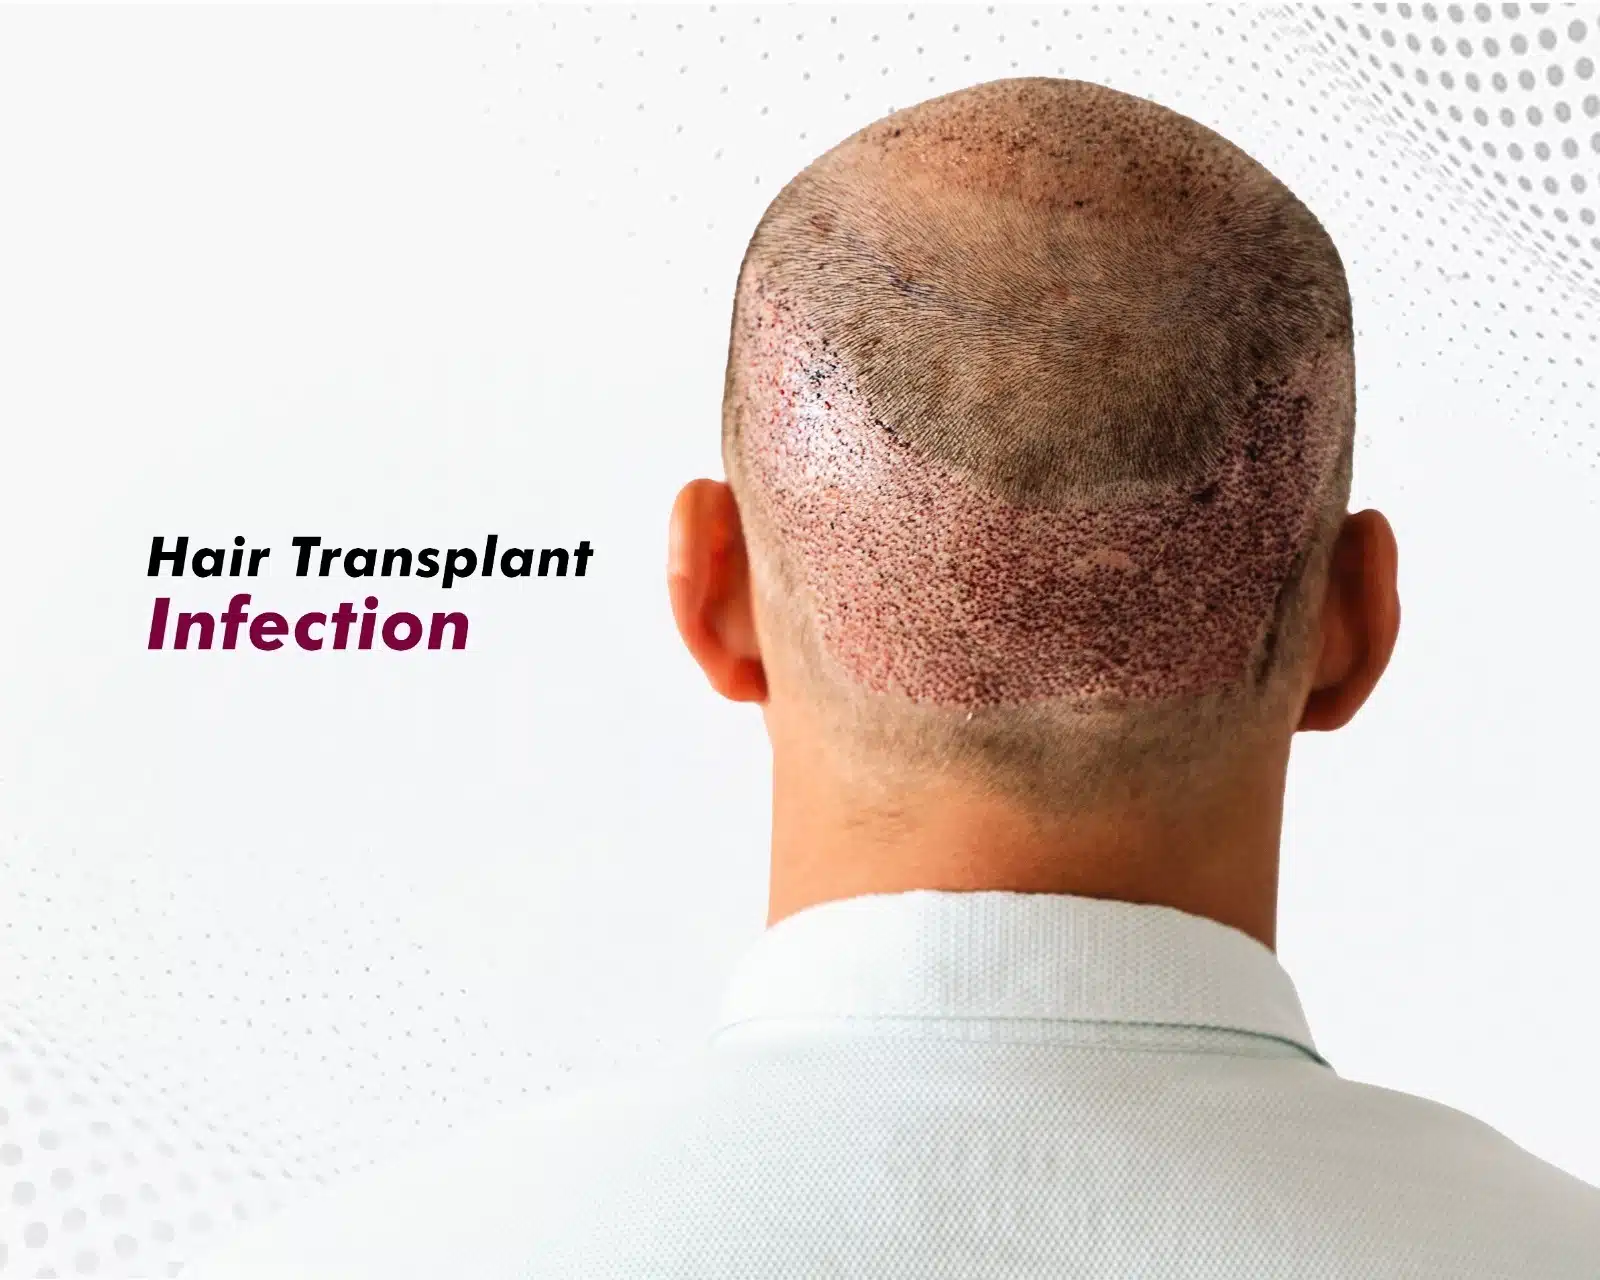 Hair Transplant Infection